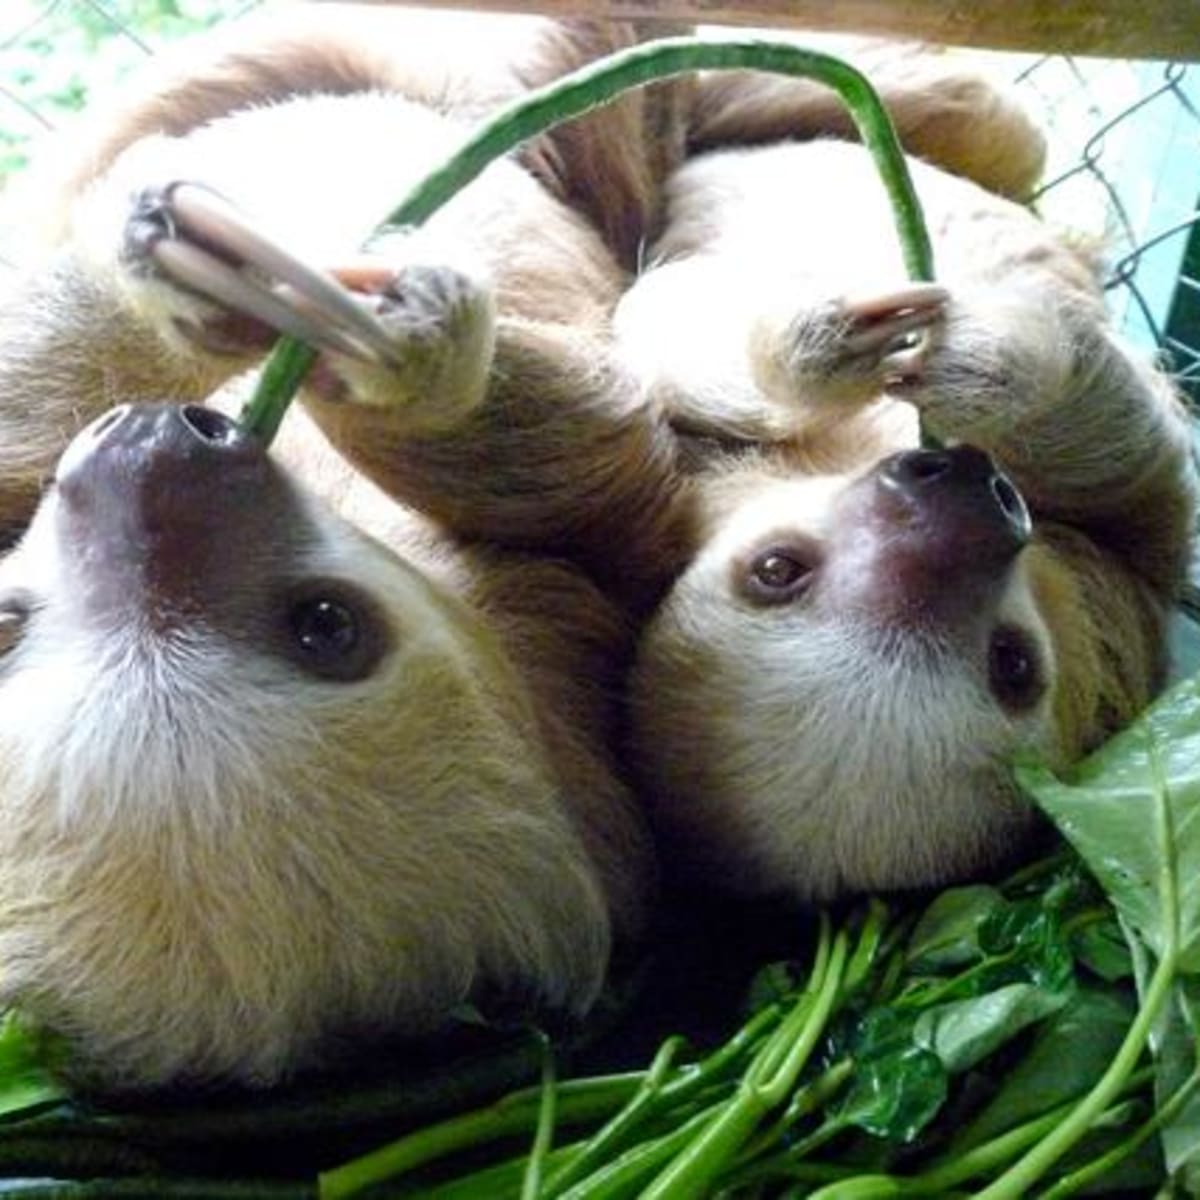 Are you allowed to have a sloth as a pet Pet Sloth Legality Feeding And Housing Introduction Pethelpful